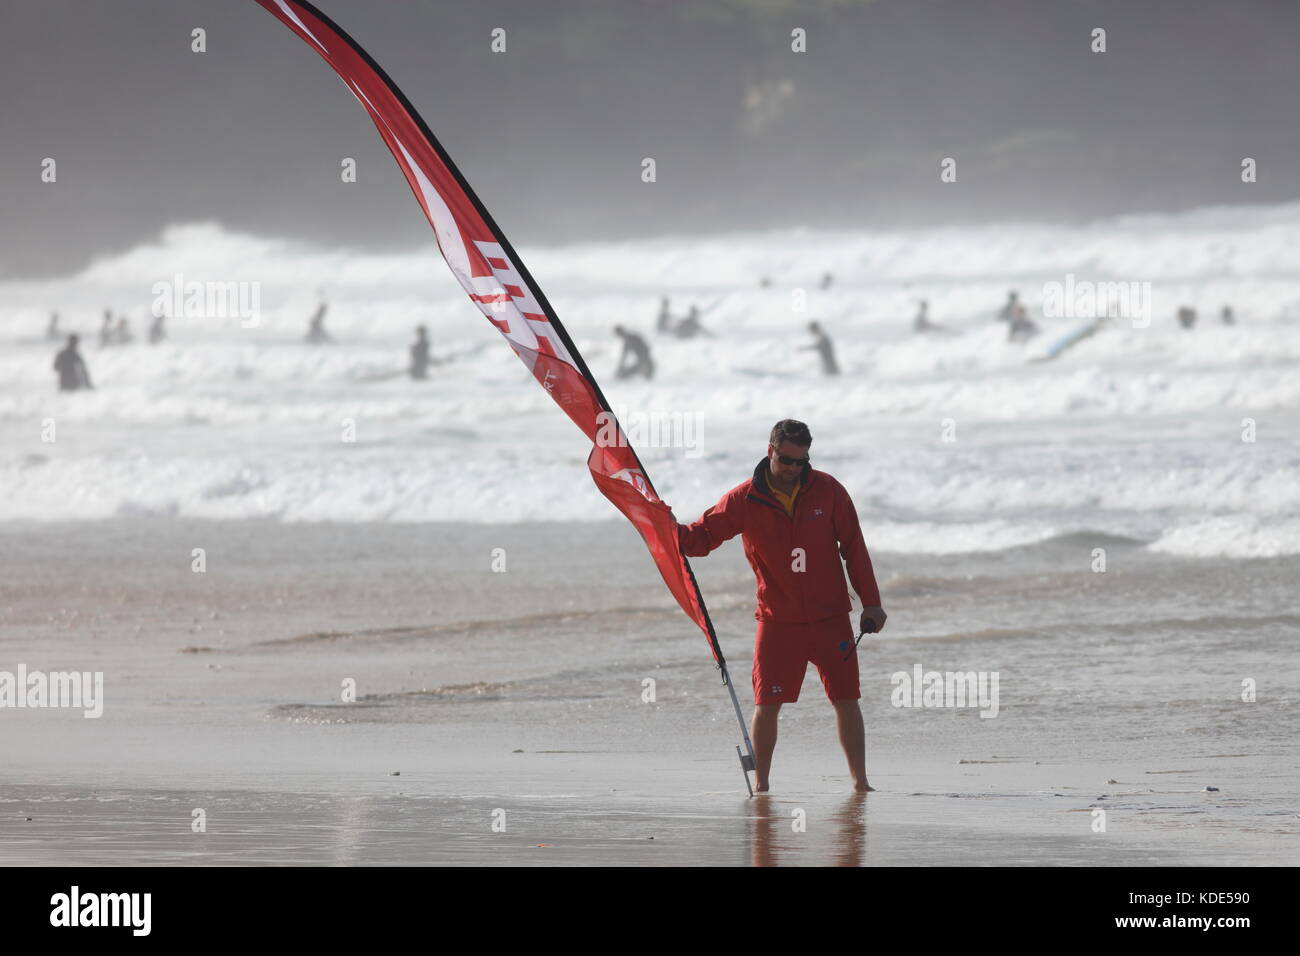 Fistral Beach, Newquay, Cornwall, UK. 13th October, 2017. Surfers take part in Day 1 heats of the British University and College Sports Surfing Competition. Numerous college surfers attended the event in fair weather conditions. Stock Photo